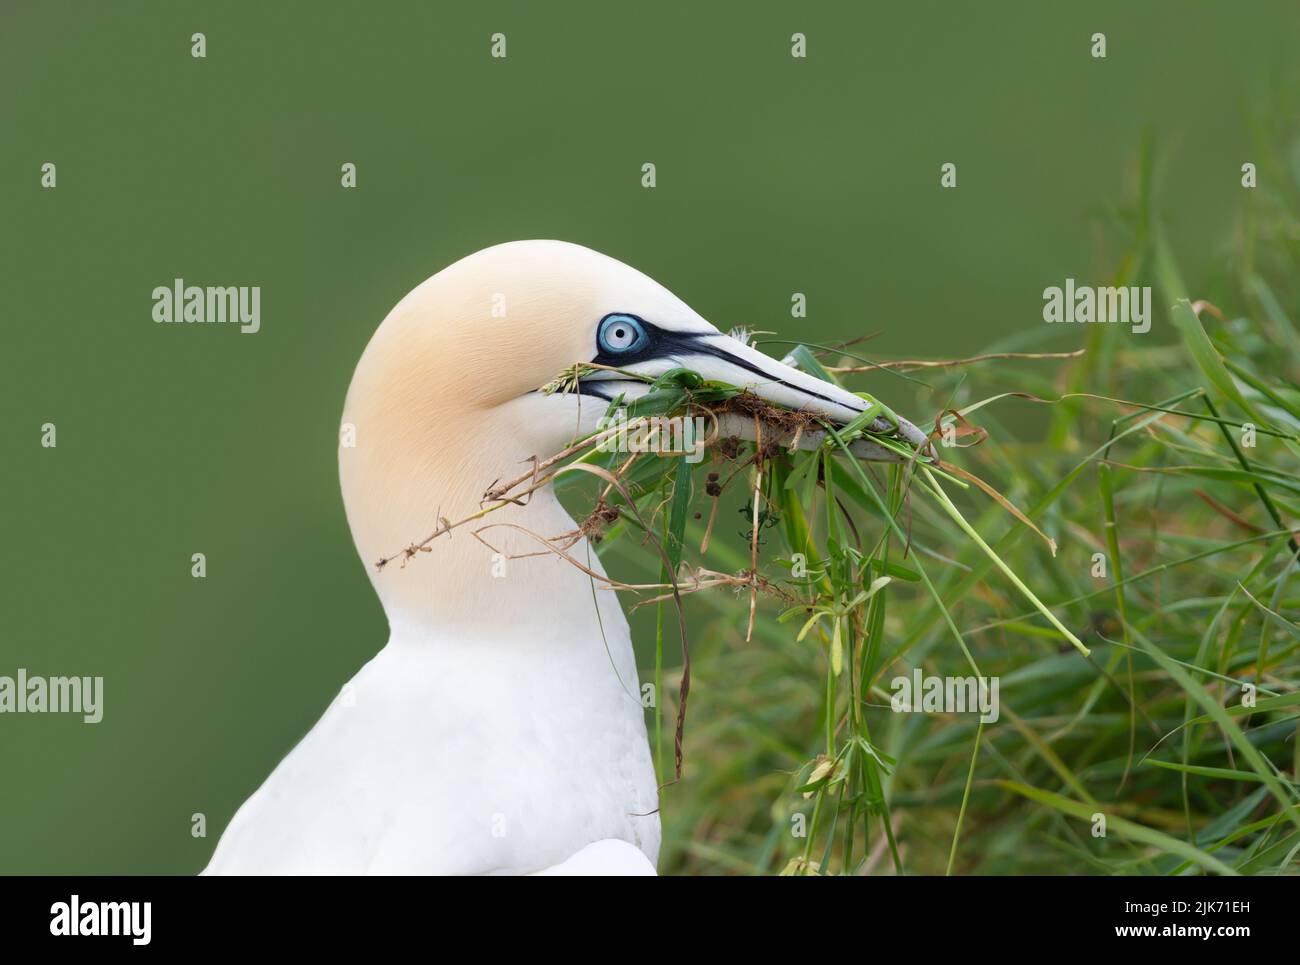 Close up of a Northern gannet (Morus bassana) with nesting material in the beak, Bempton cliffs, UK. Stock Photo